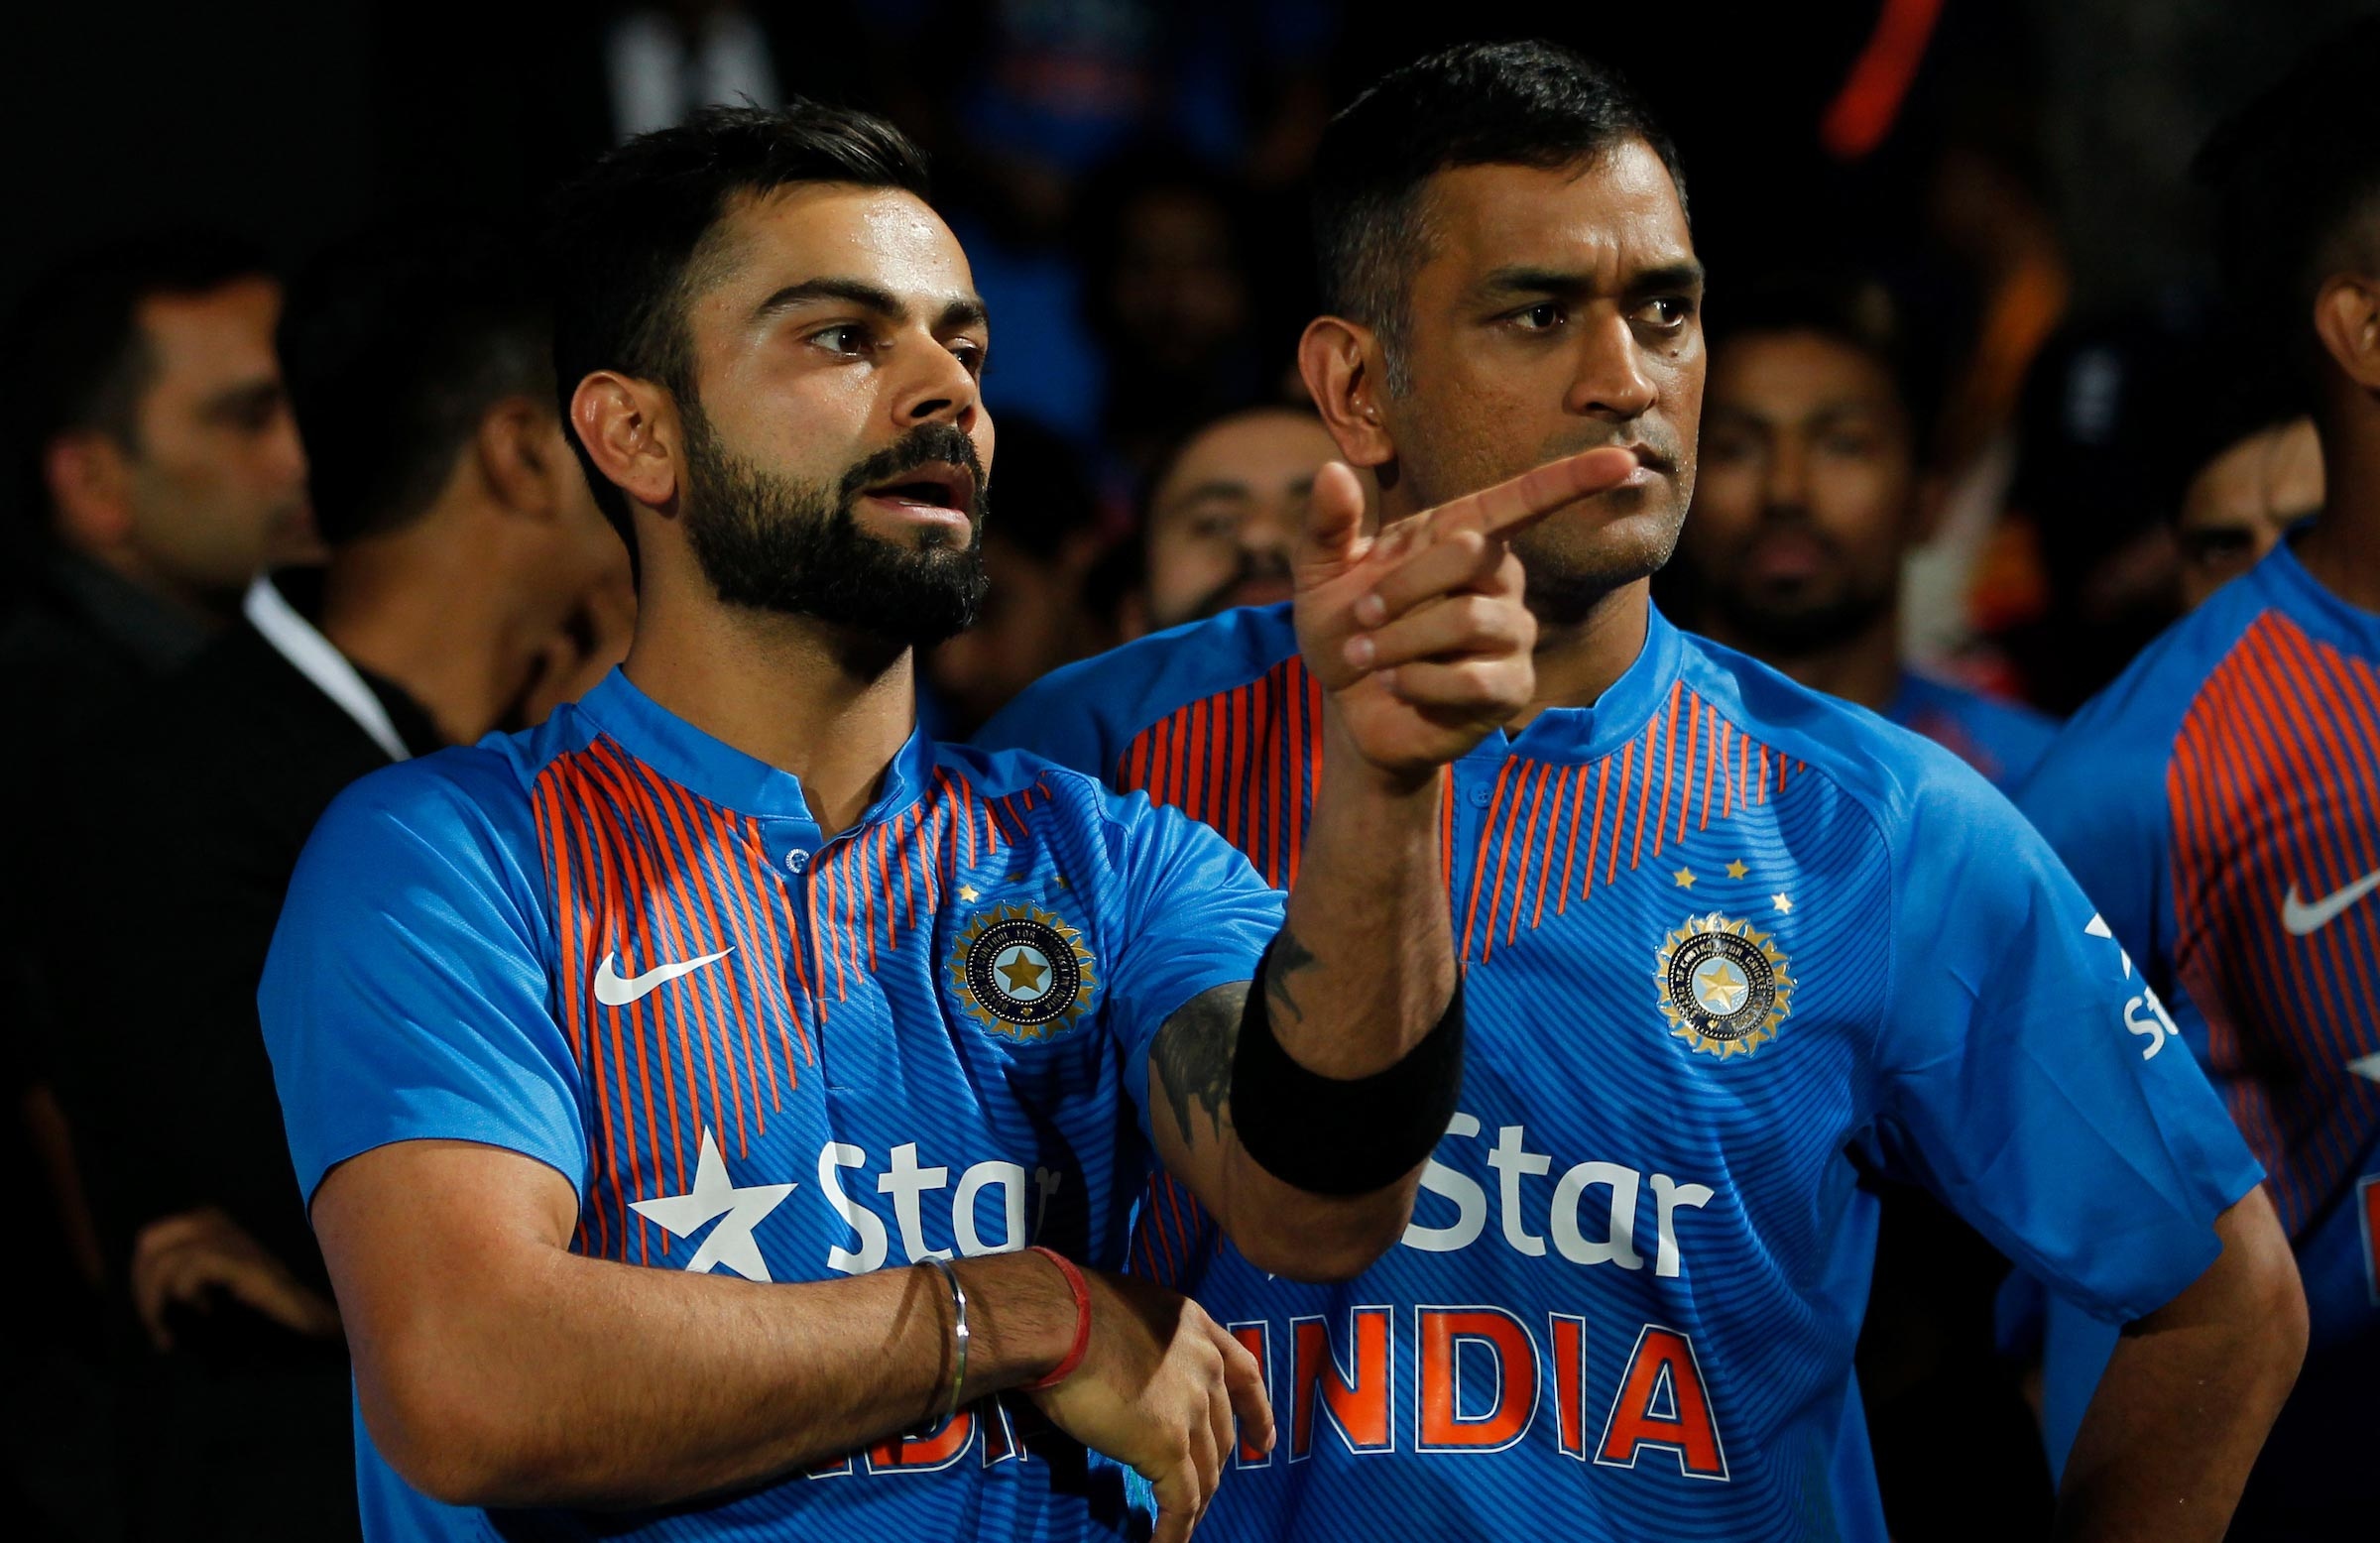 Dhoni And Virat Kohli Discussing in Indian Jersy